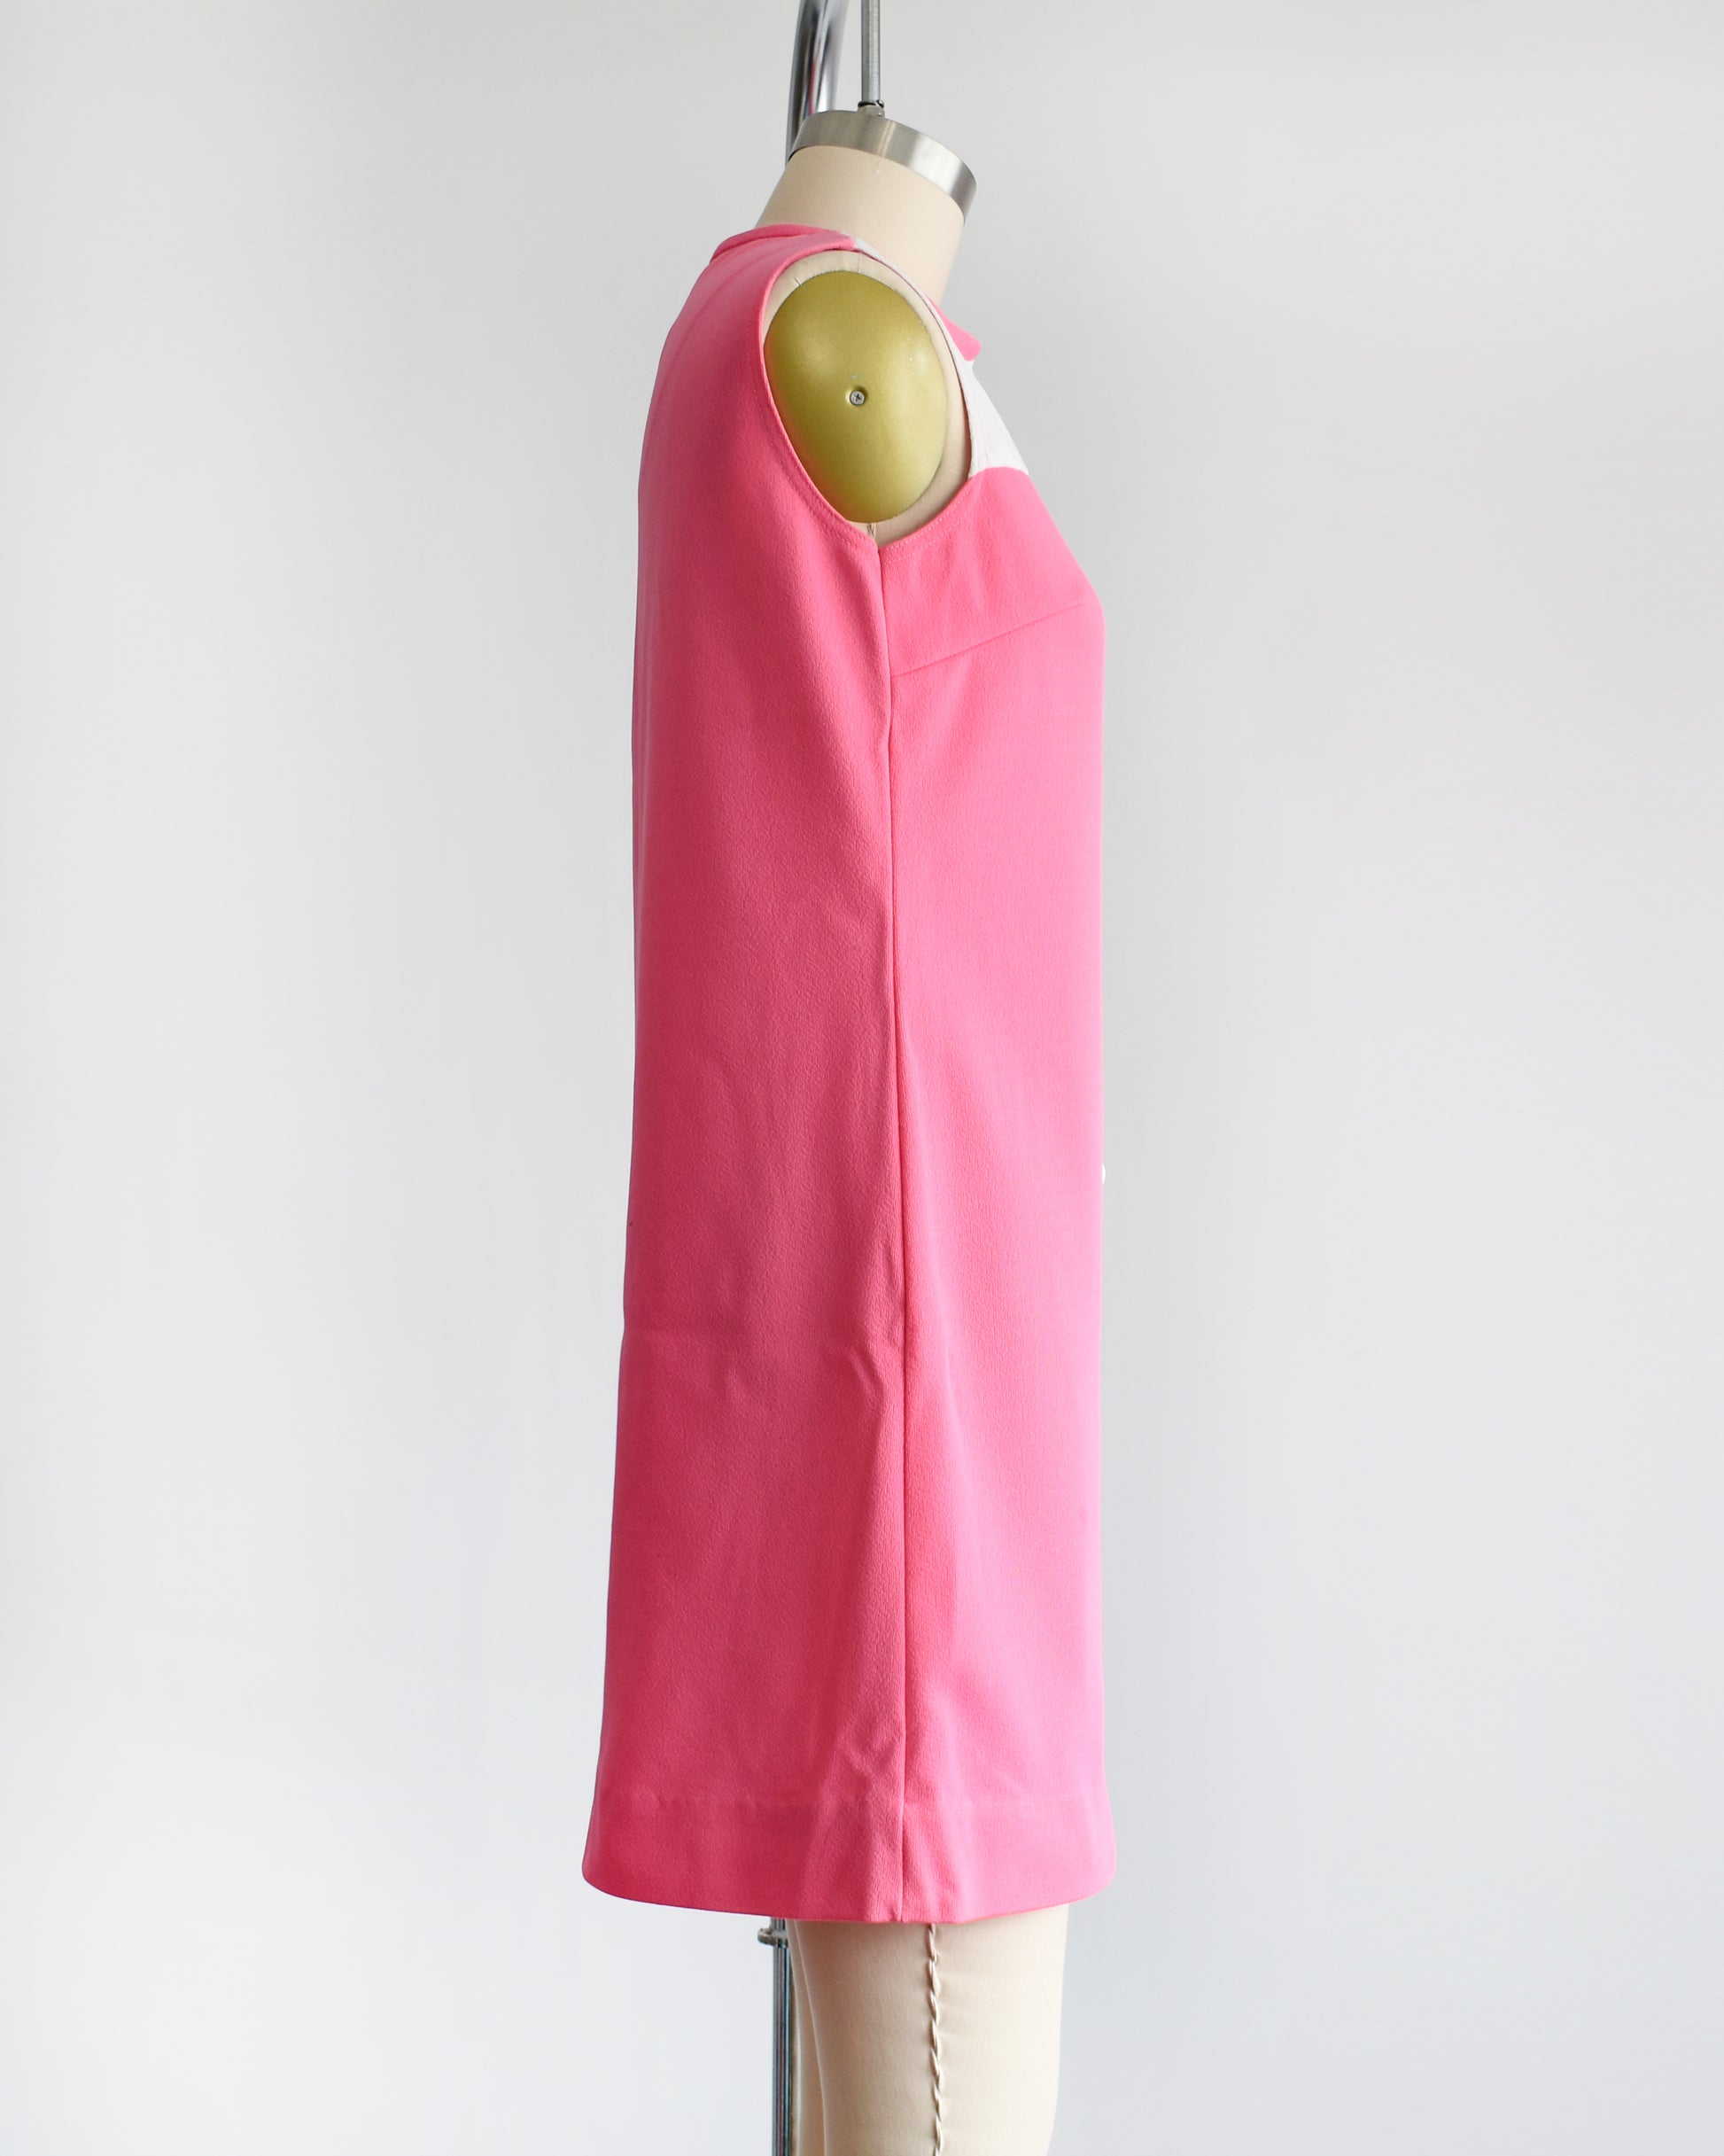 side view of a vintage 1960s pink and white mod mini dress that has five white buttons down the front.